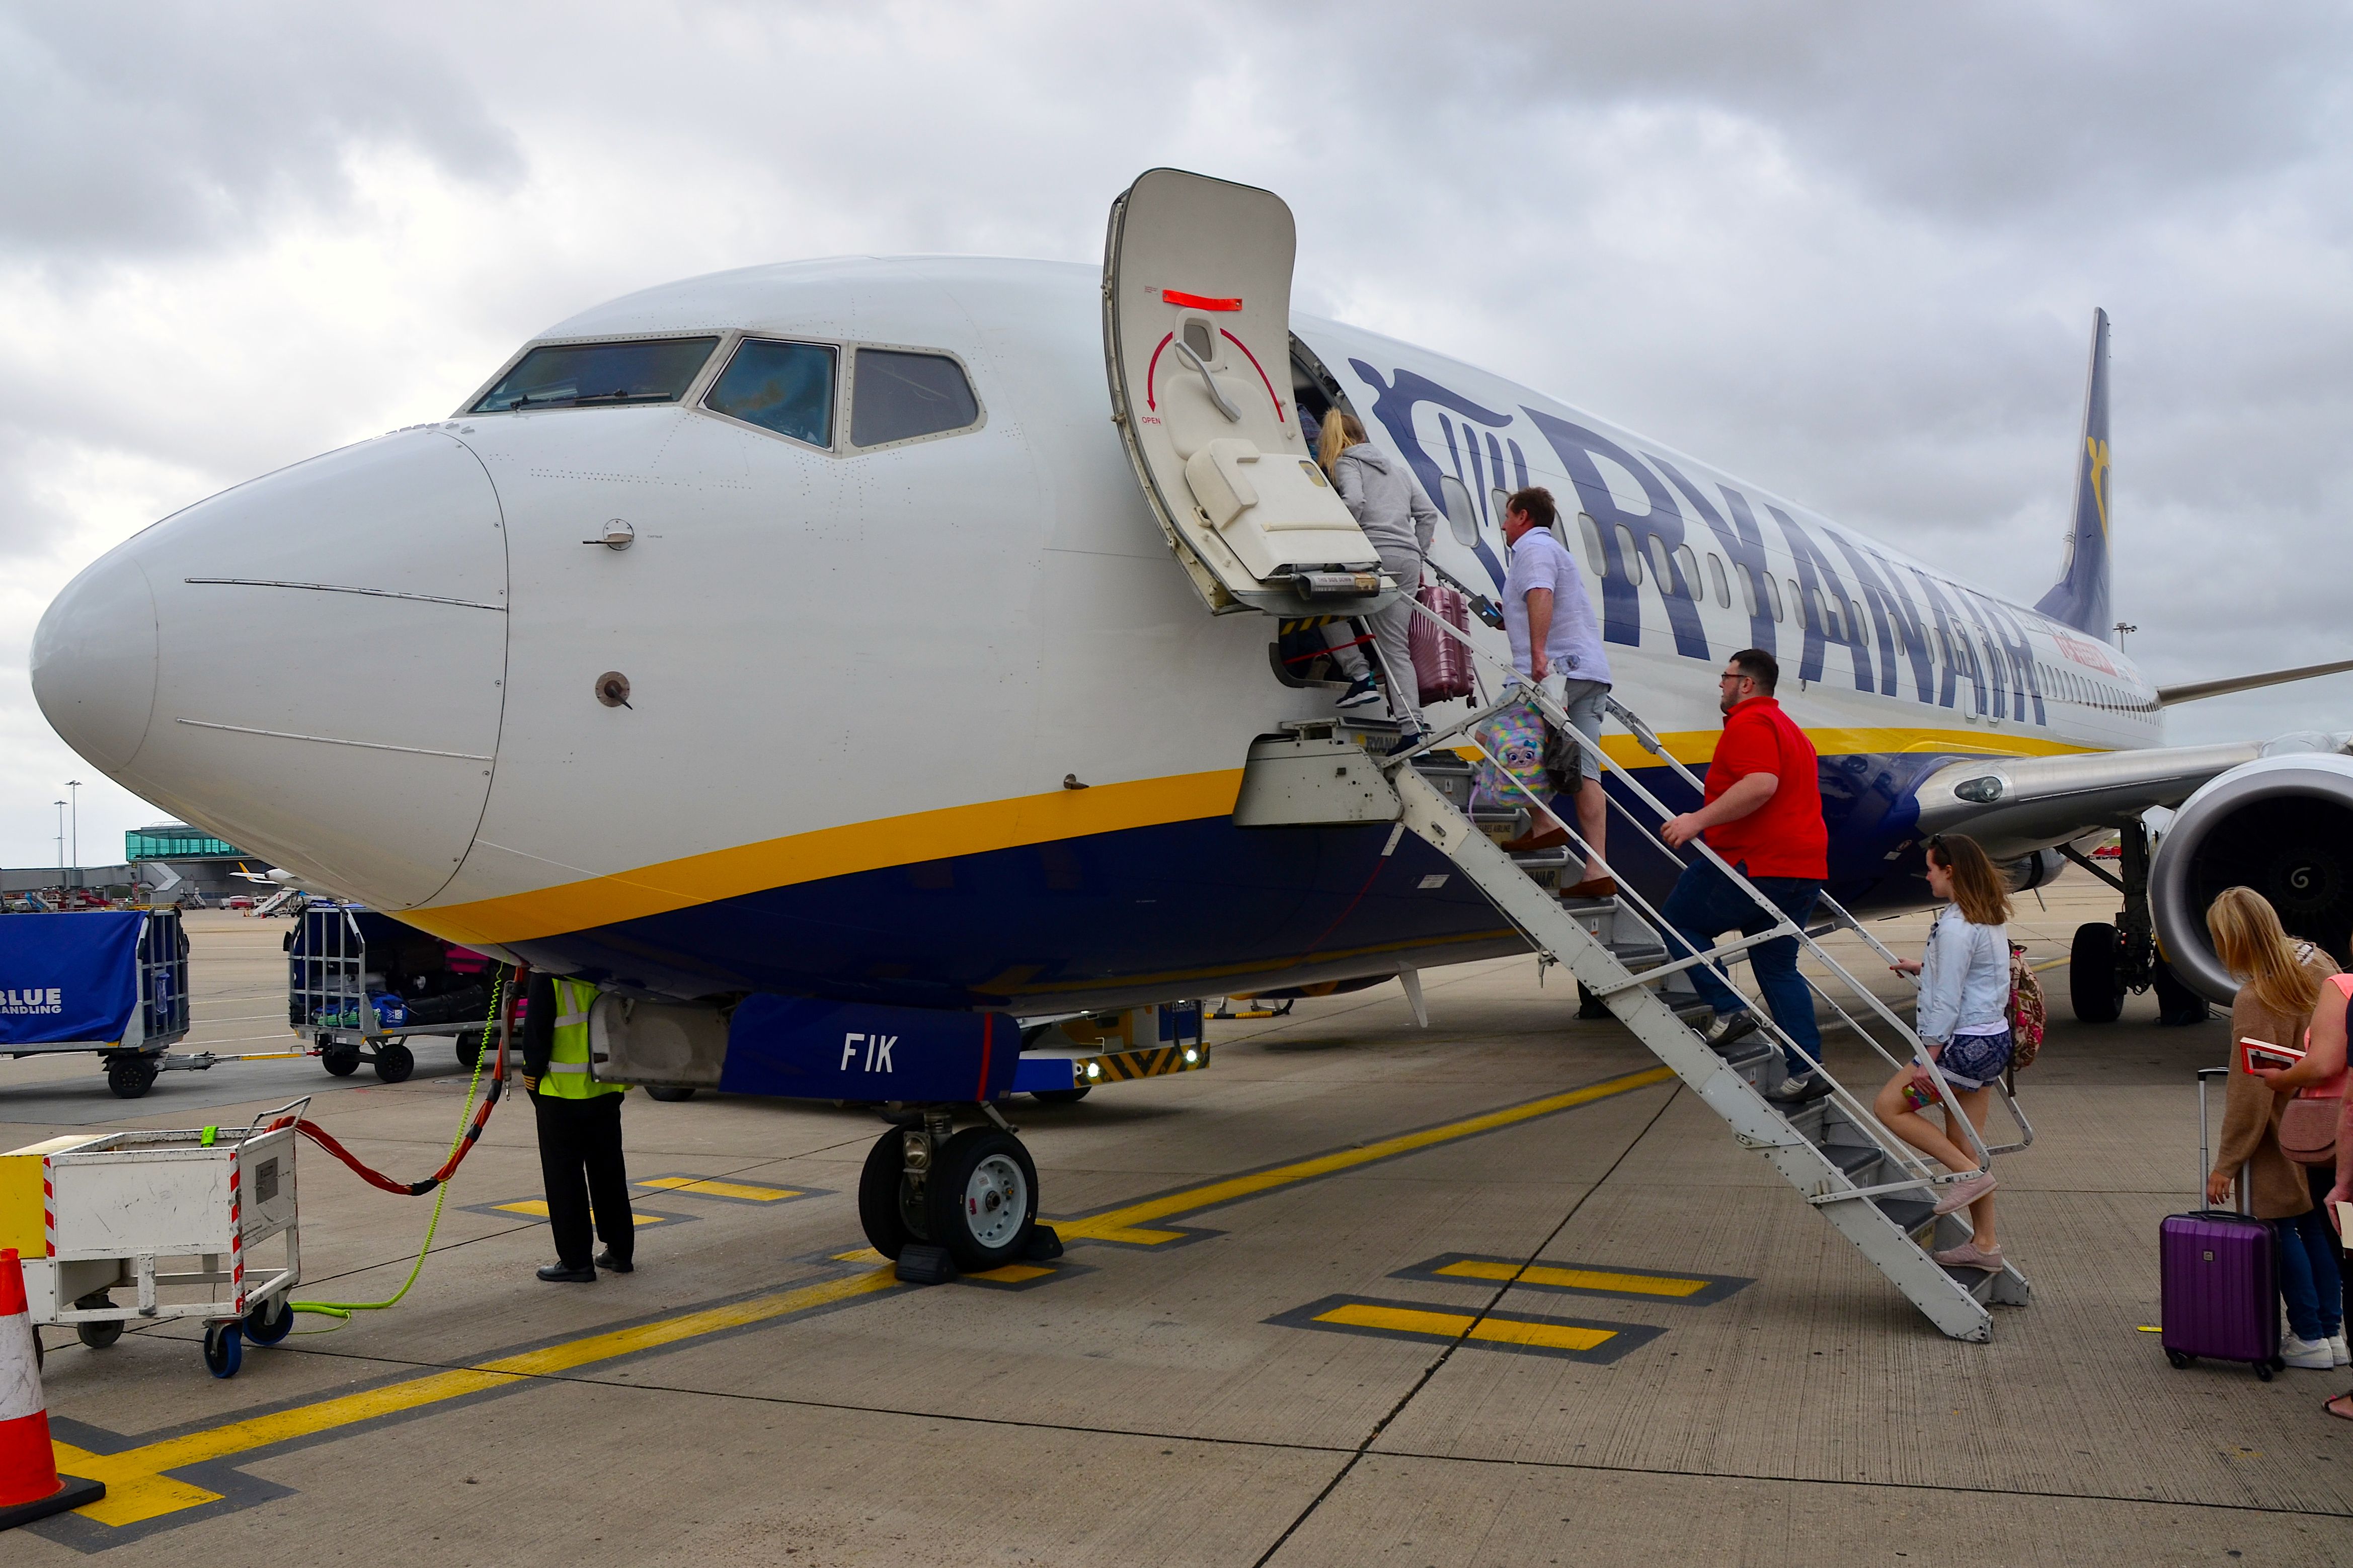 A Ryanair UK plane parked at Stansted Airport.